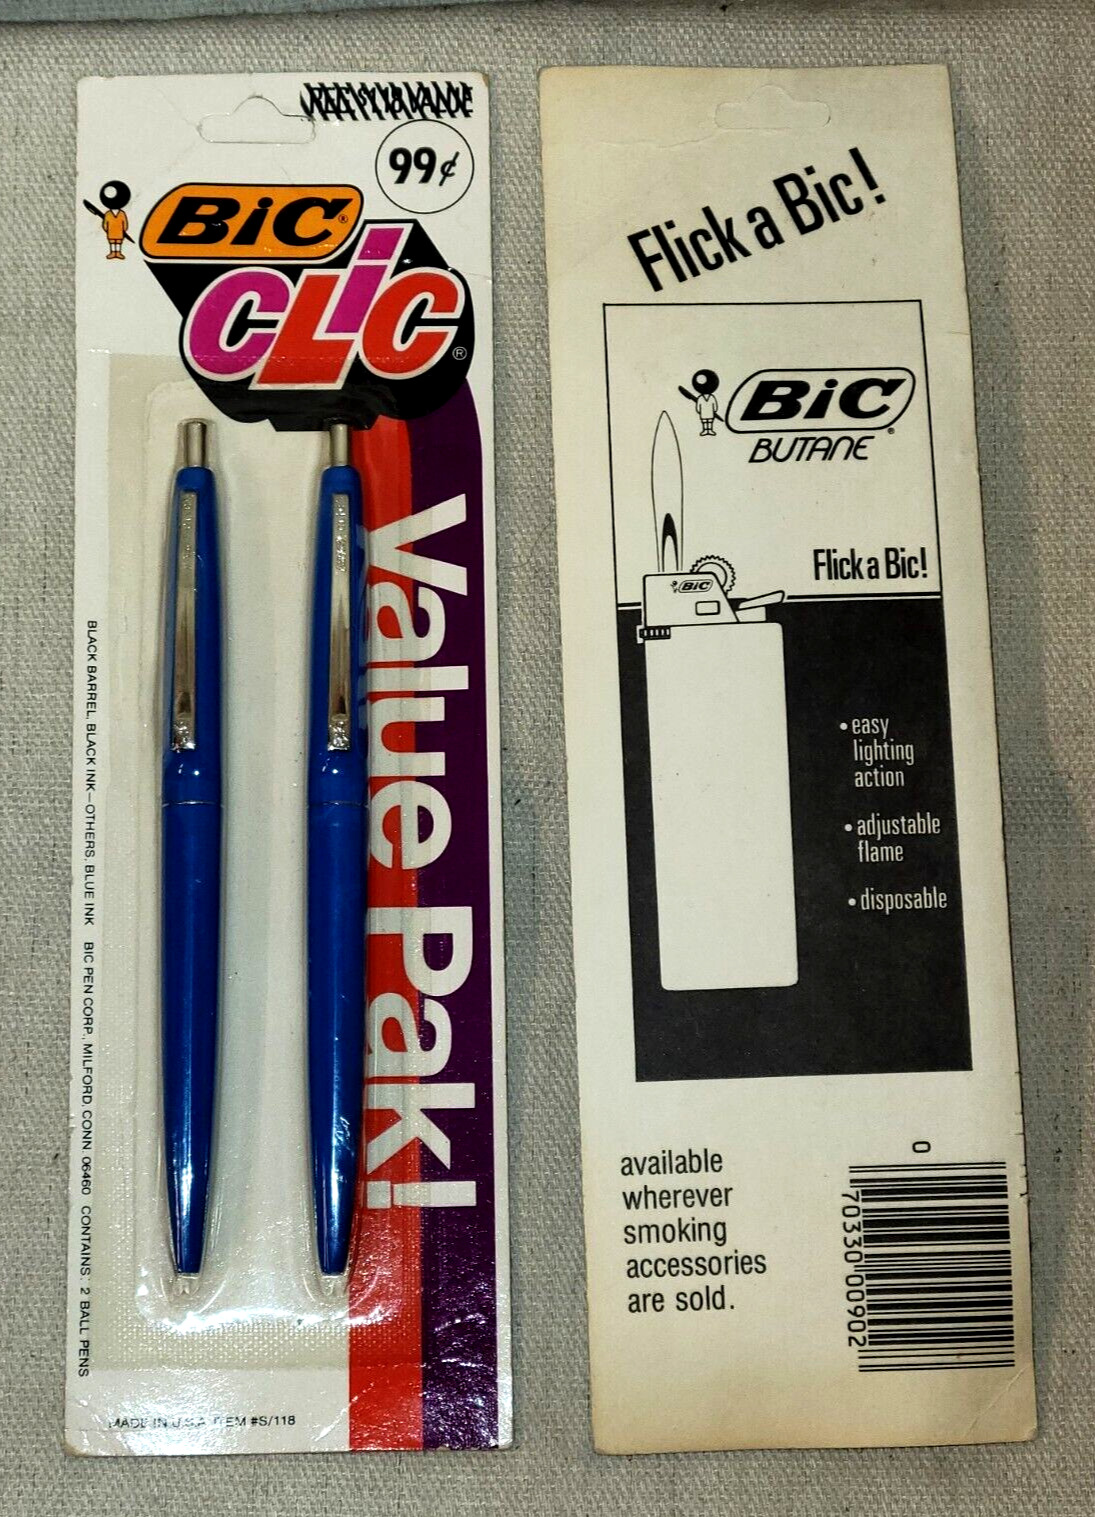 Vintage New Old Stock Bic Clic Value Pak Includes 2 Ball Pens With Blue Ink